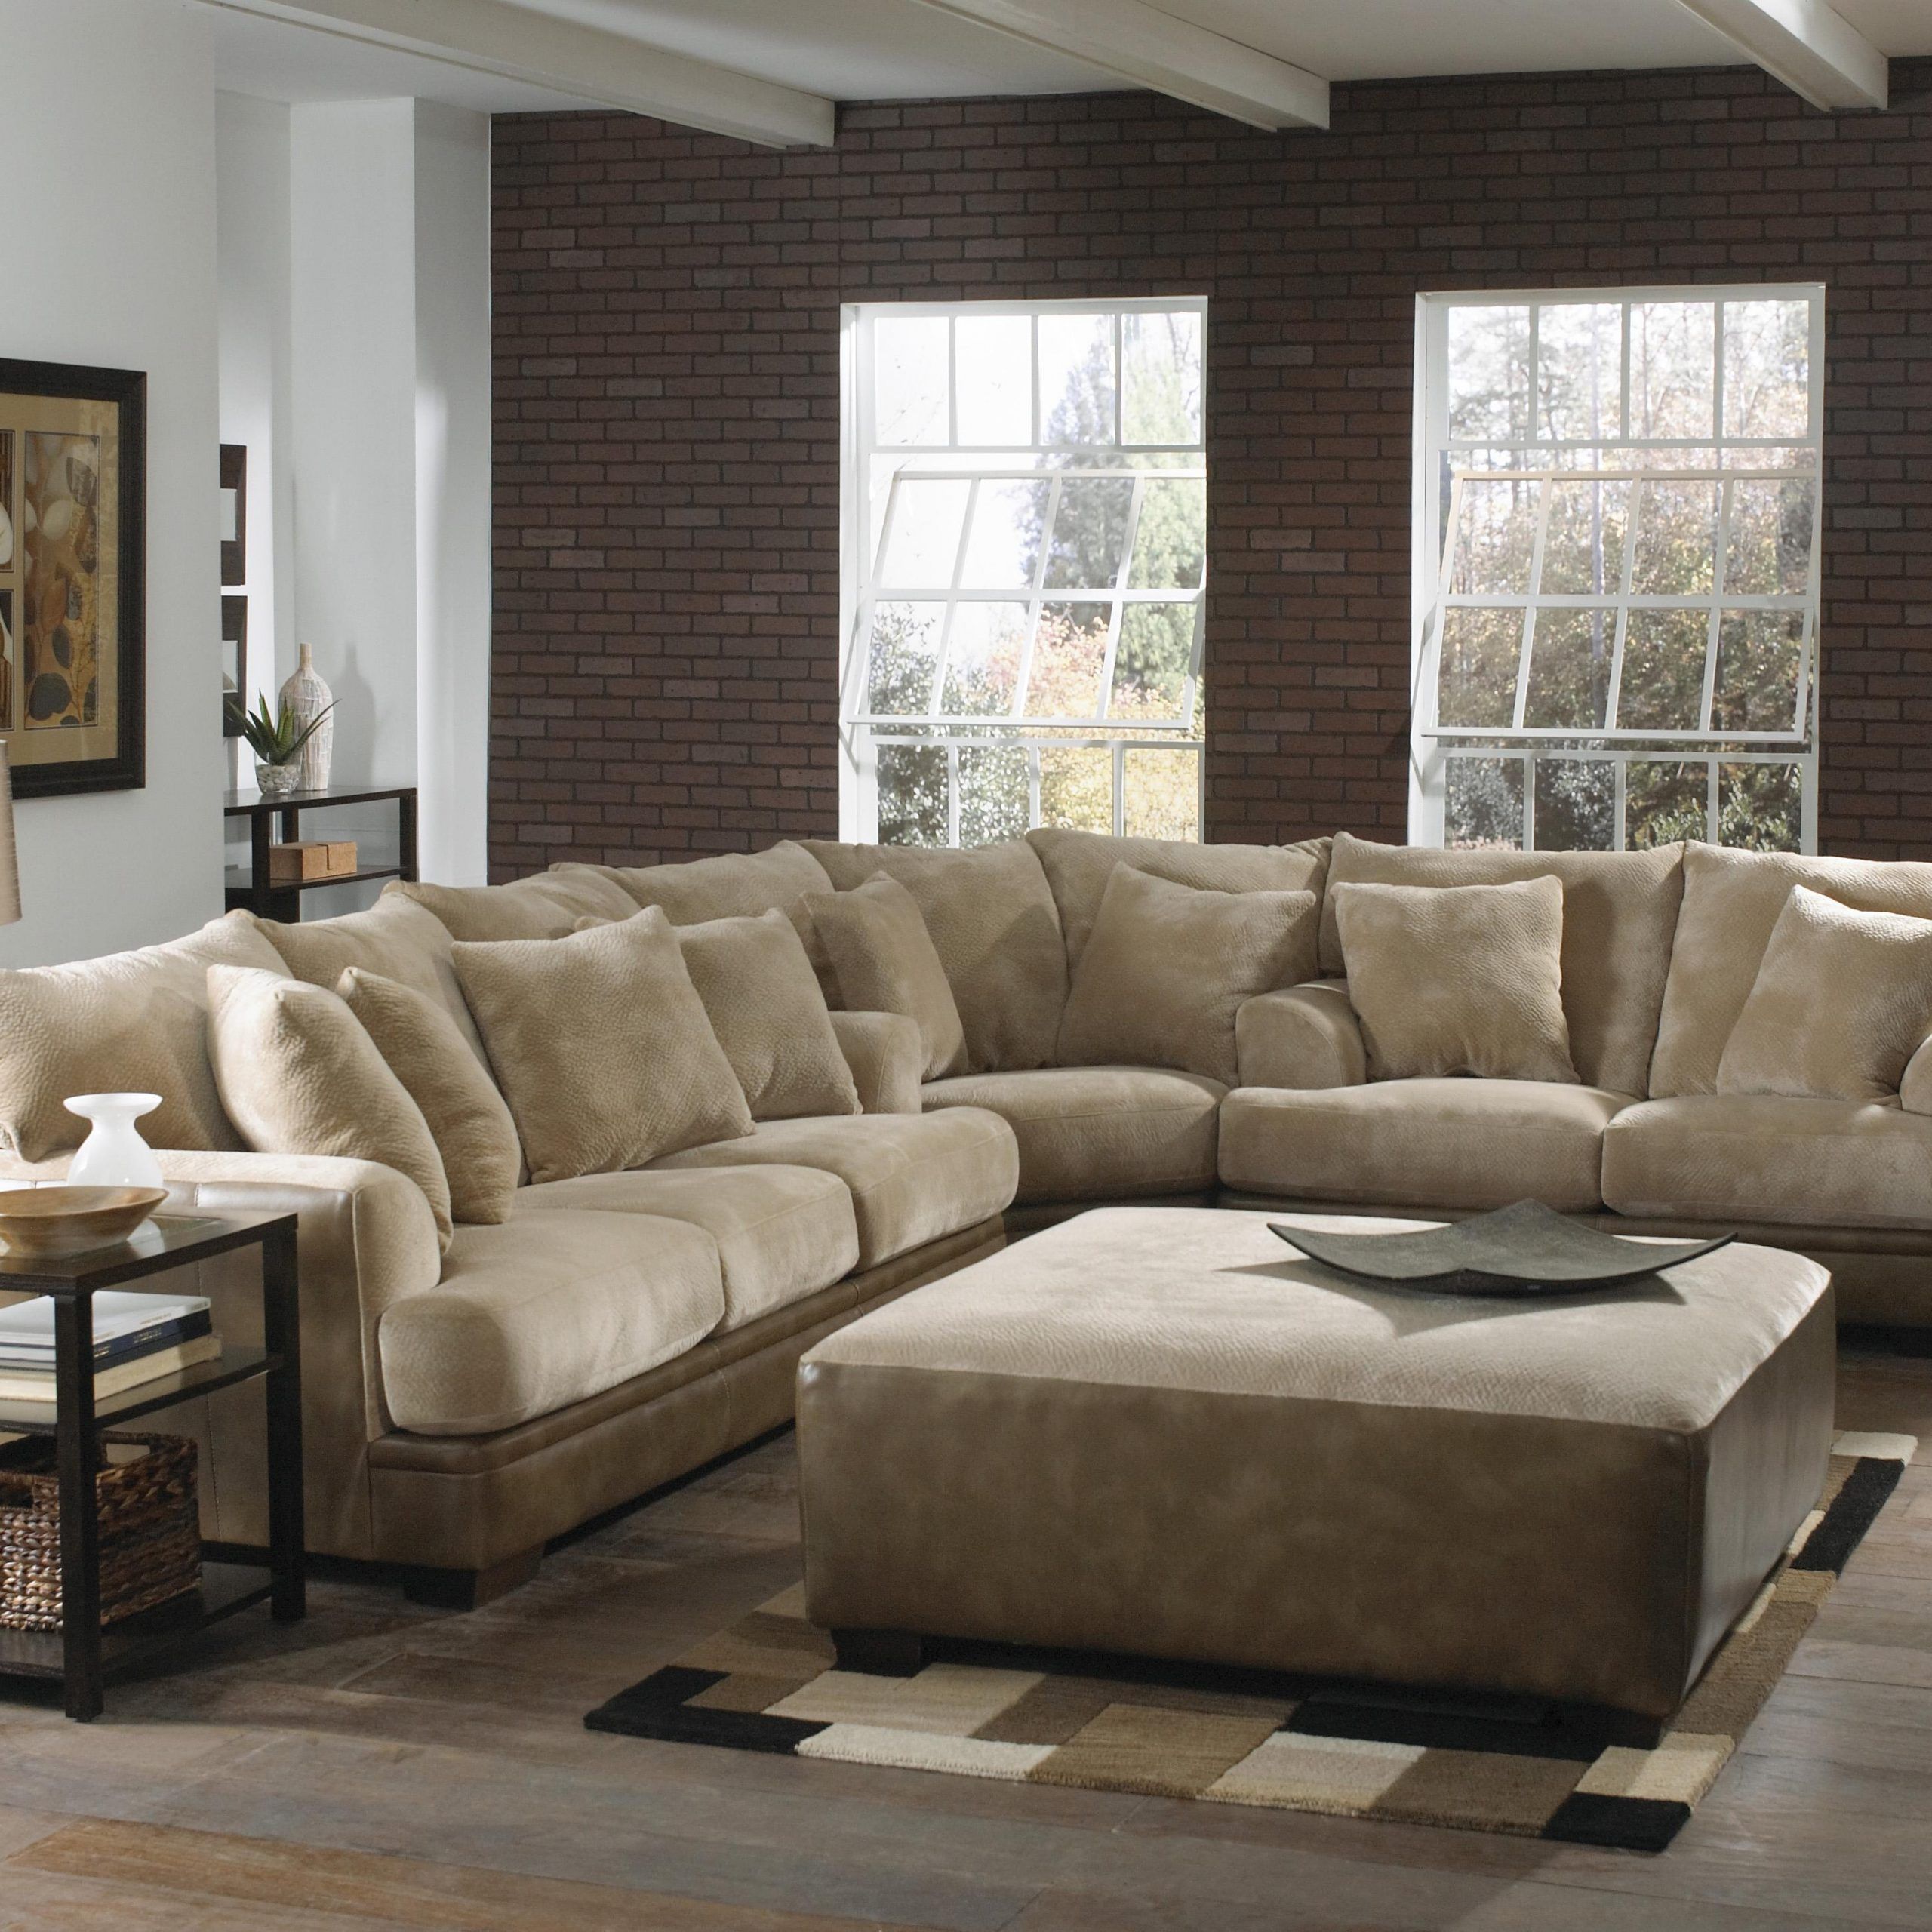 Large L Shaped Sectional Sofa With Left Side Loveseat Throughout Popular Hannah Left Sectional Sofas (Photo 8 of 25)